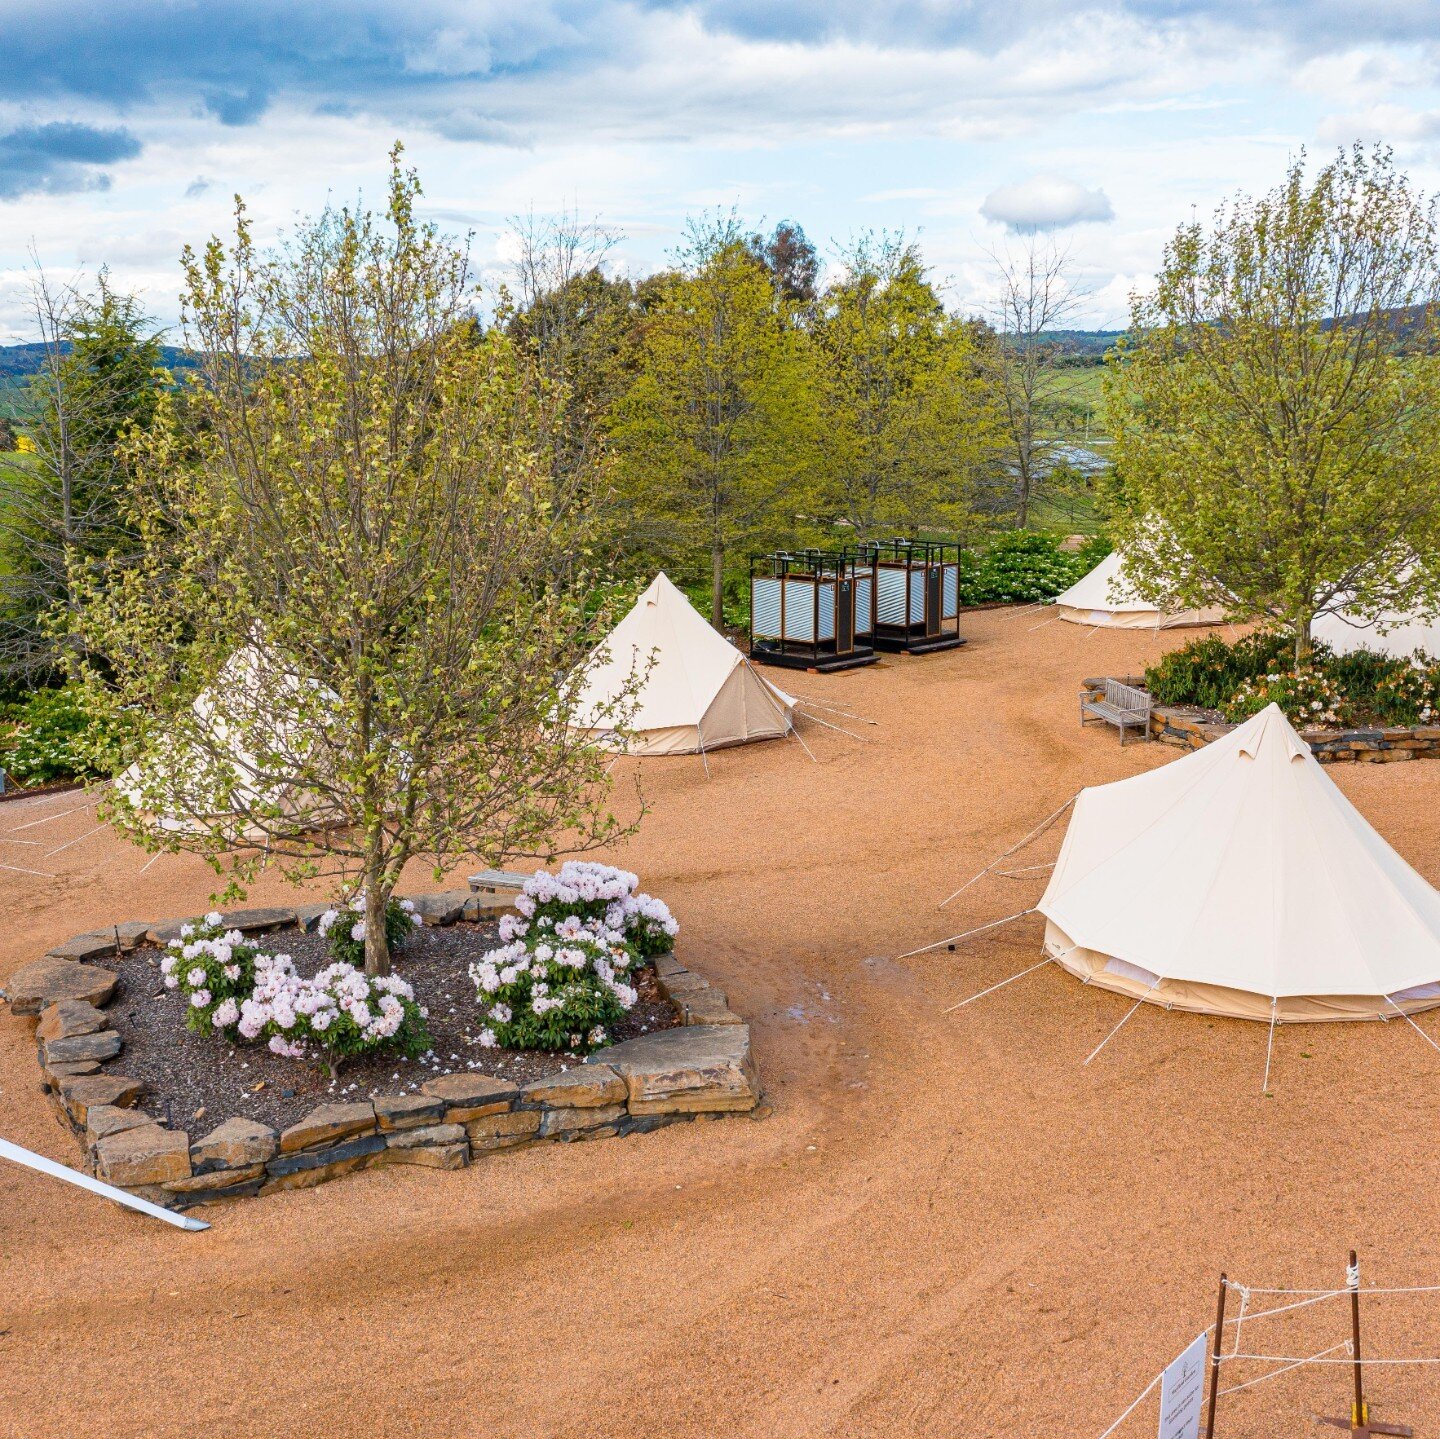 Time to create some amazing family memories at Mayfield.

Glamping at Mayfield is the perfect family escape during the school holidays. Extra beds can be added for under 16s for only $105 per child including a two-course dinner at our special garden 